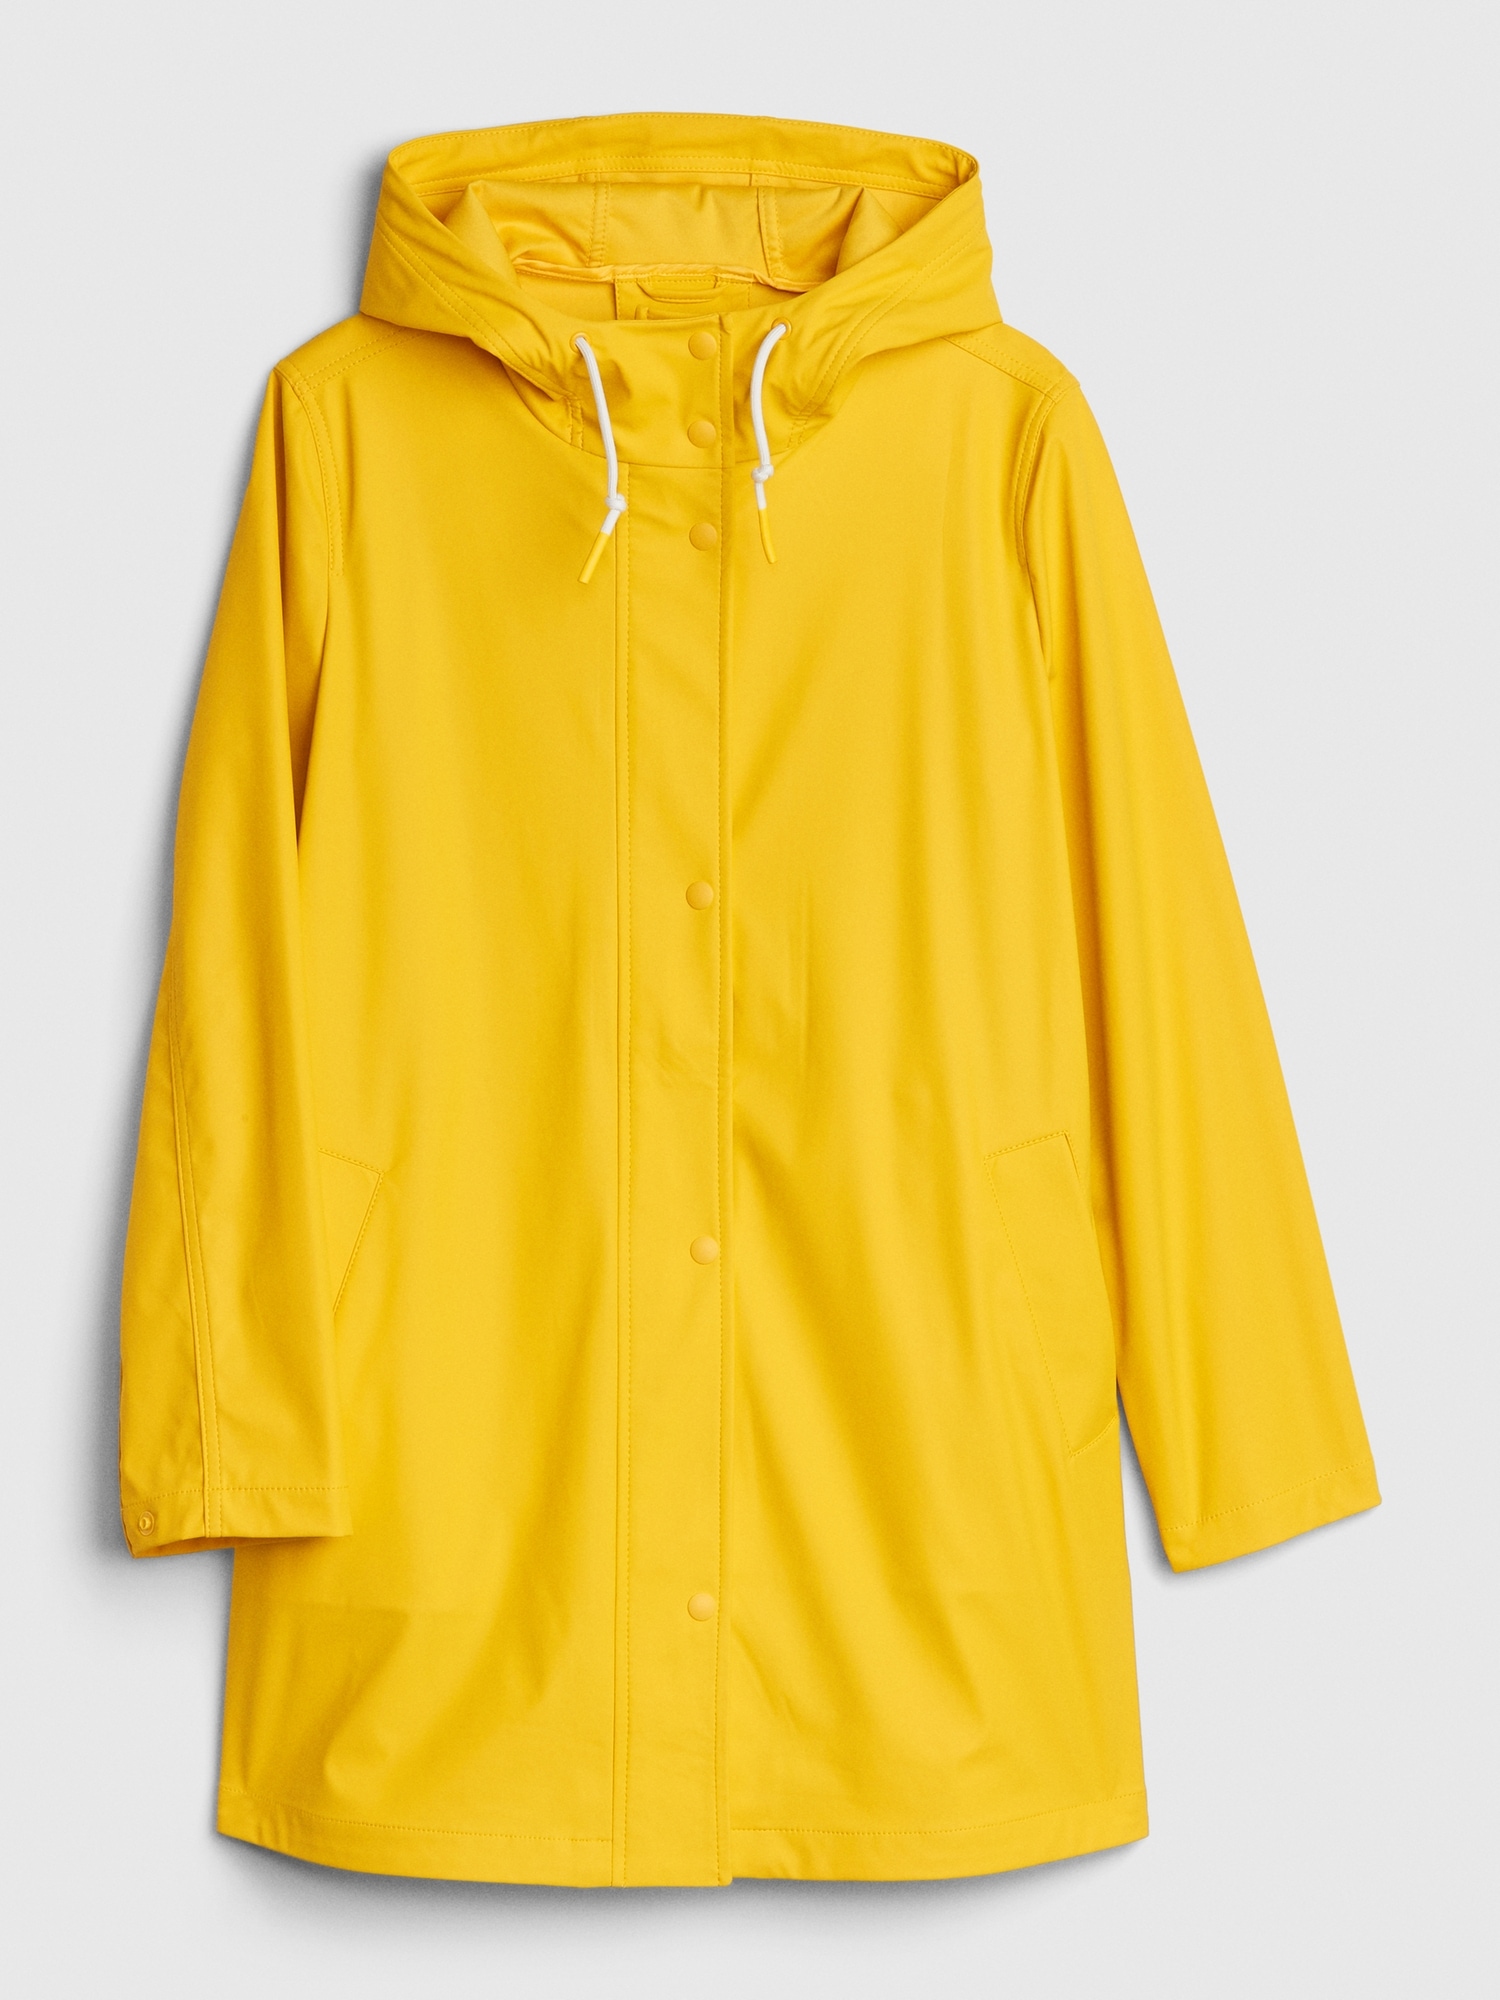 Women's raincoat yellow, striped lined with hood - THE NAUTICAL COMPANY UK